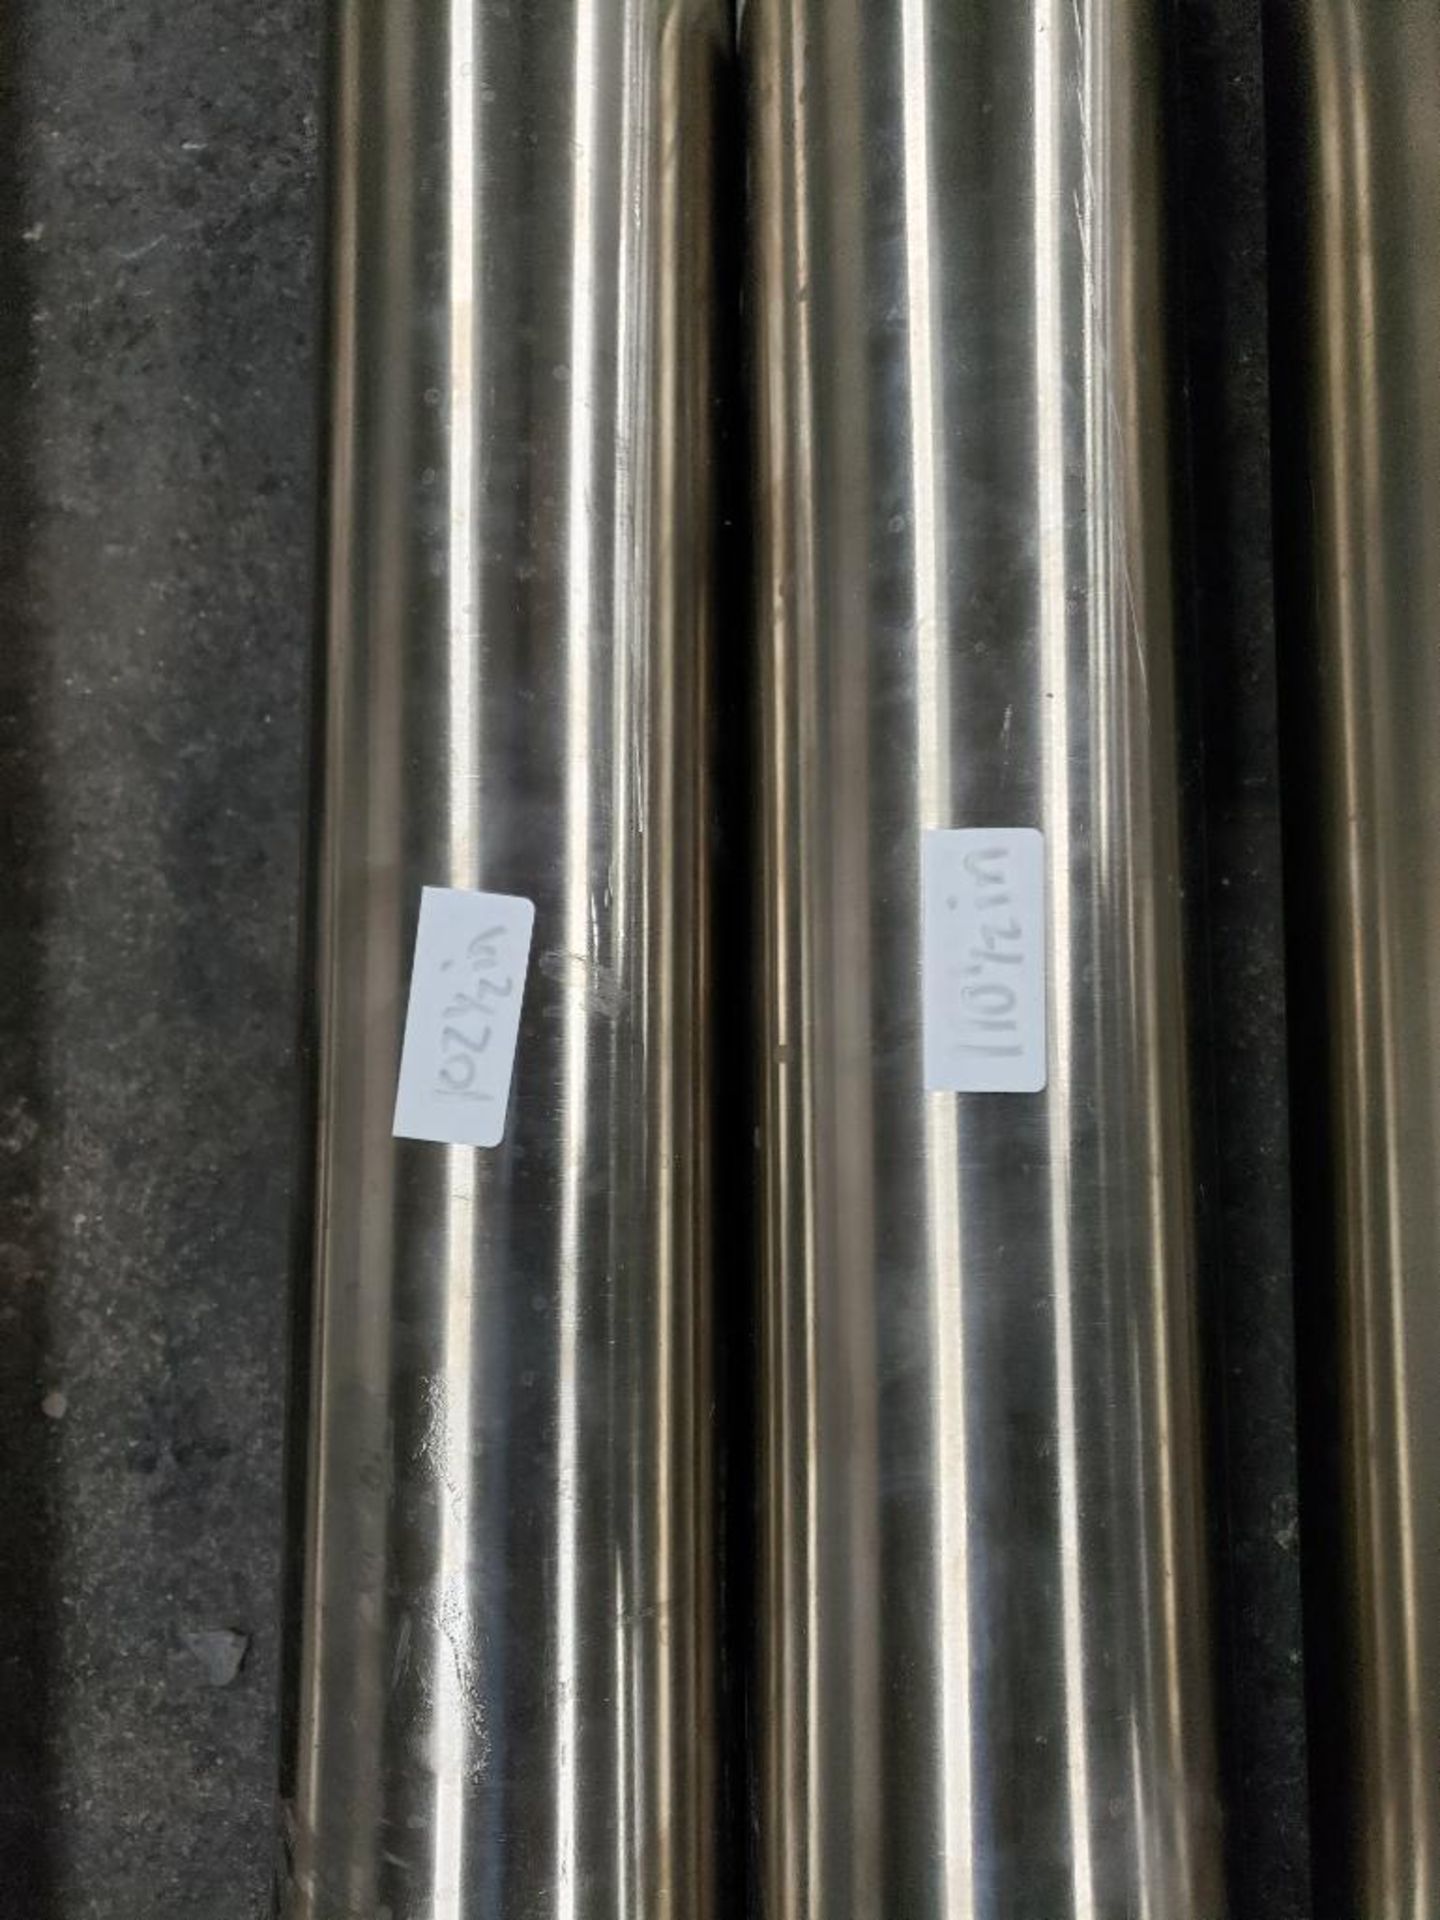 4 inch - Approx 83 feet total of 4in stainless food grade pipe in assorted lengths. - Image 10 of 14